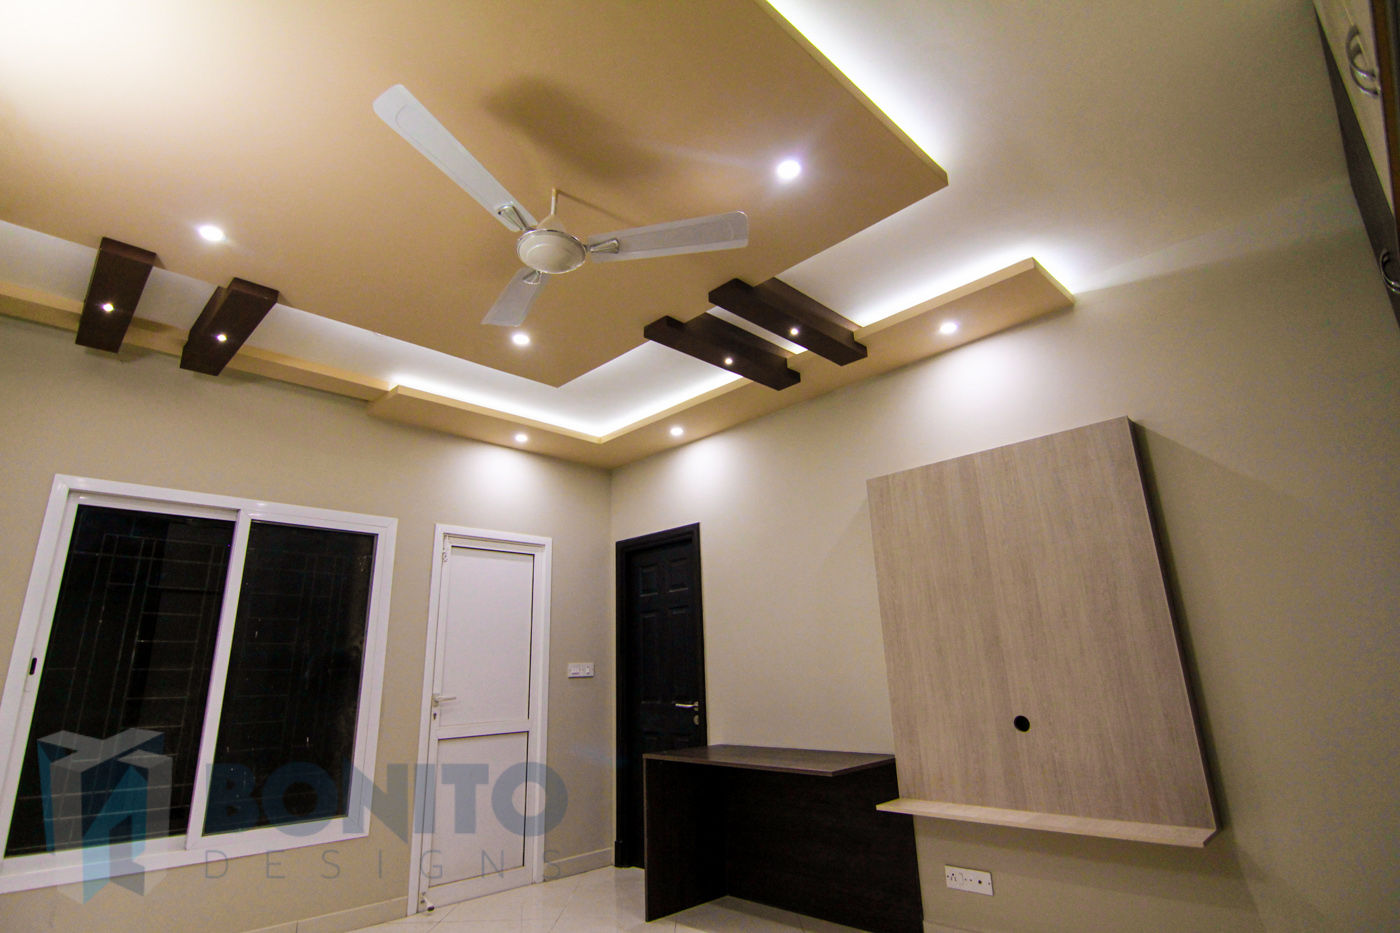 Study room false ceiling lighting homify Classic style study/office